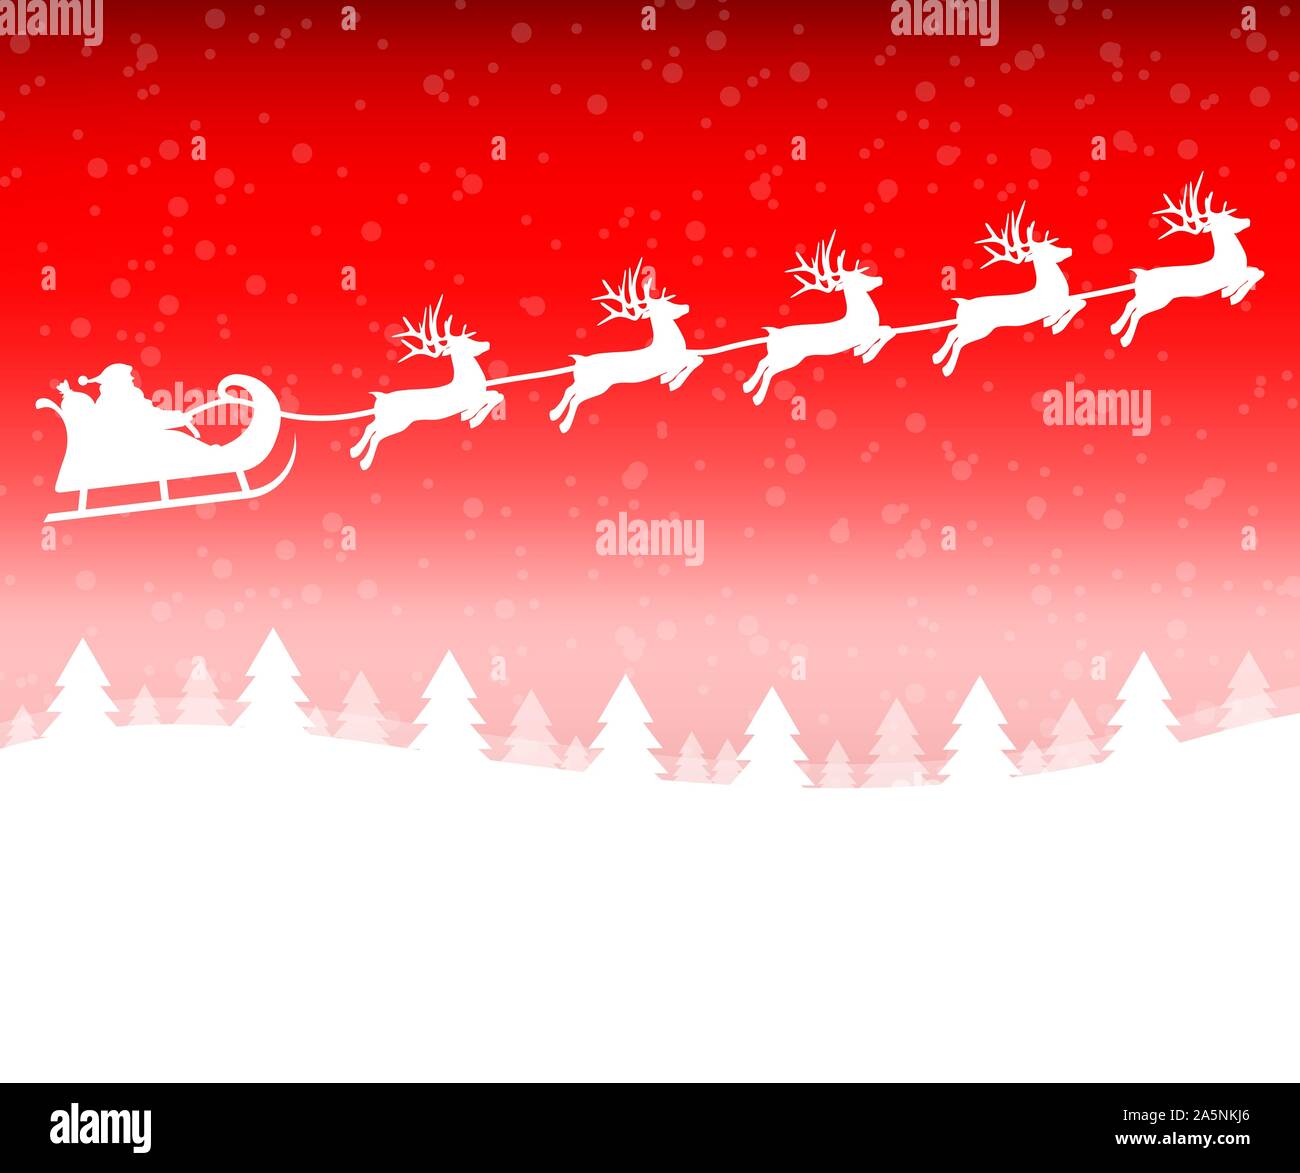 Santa Claus in a sleigh with a reindeer team flies in the Christmas forest Stock Vector